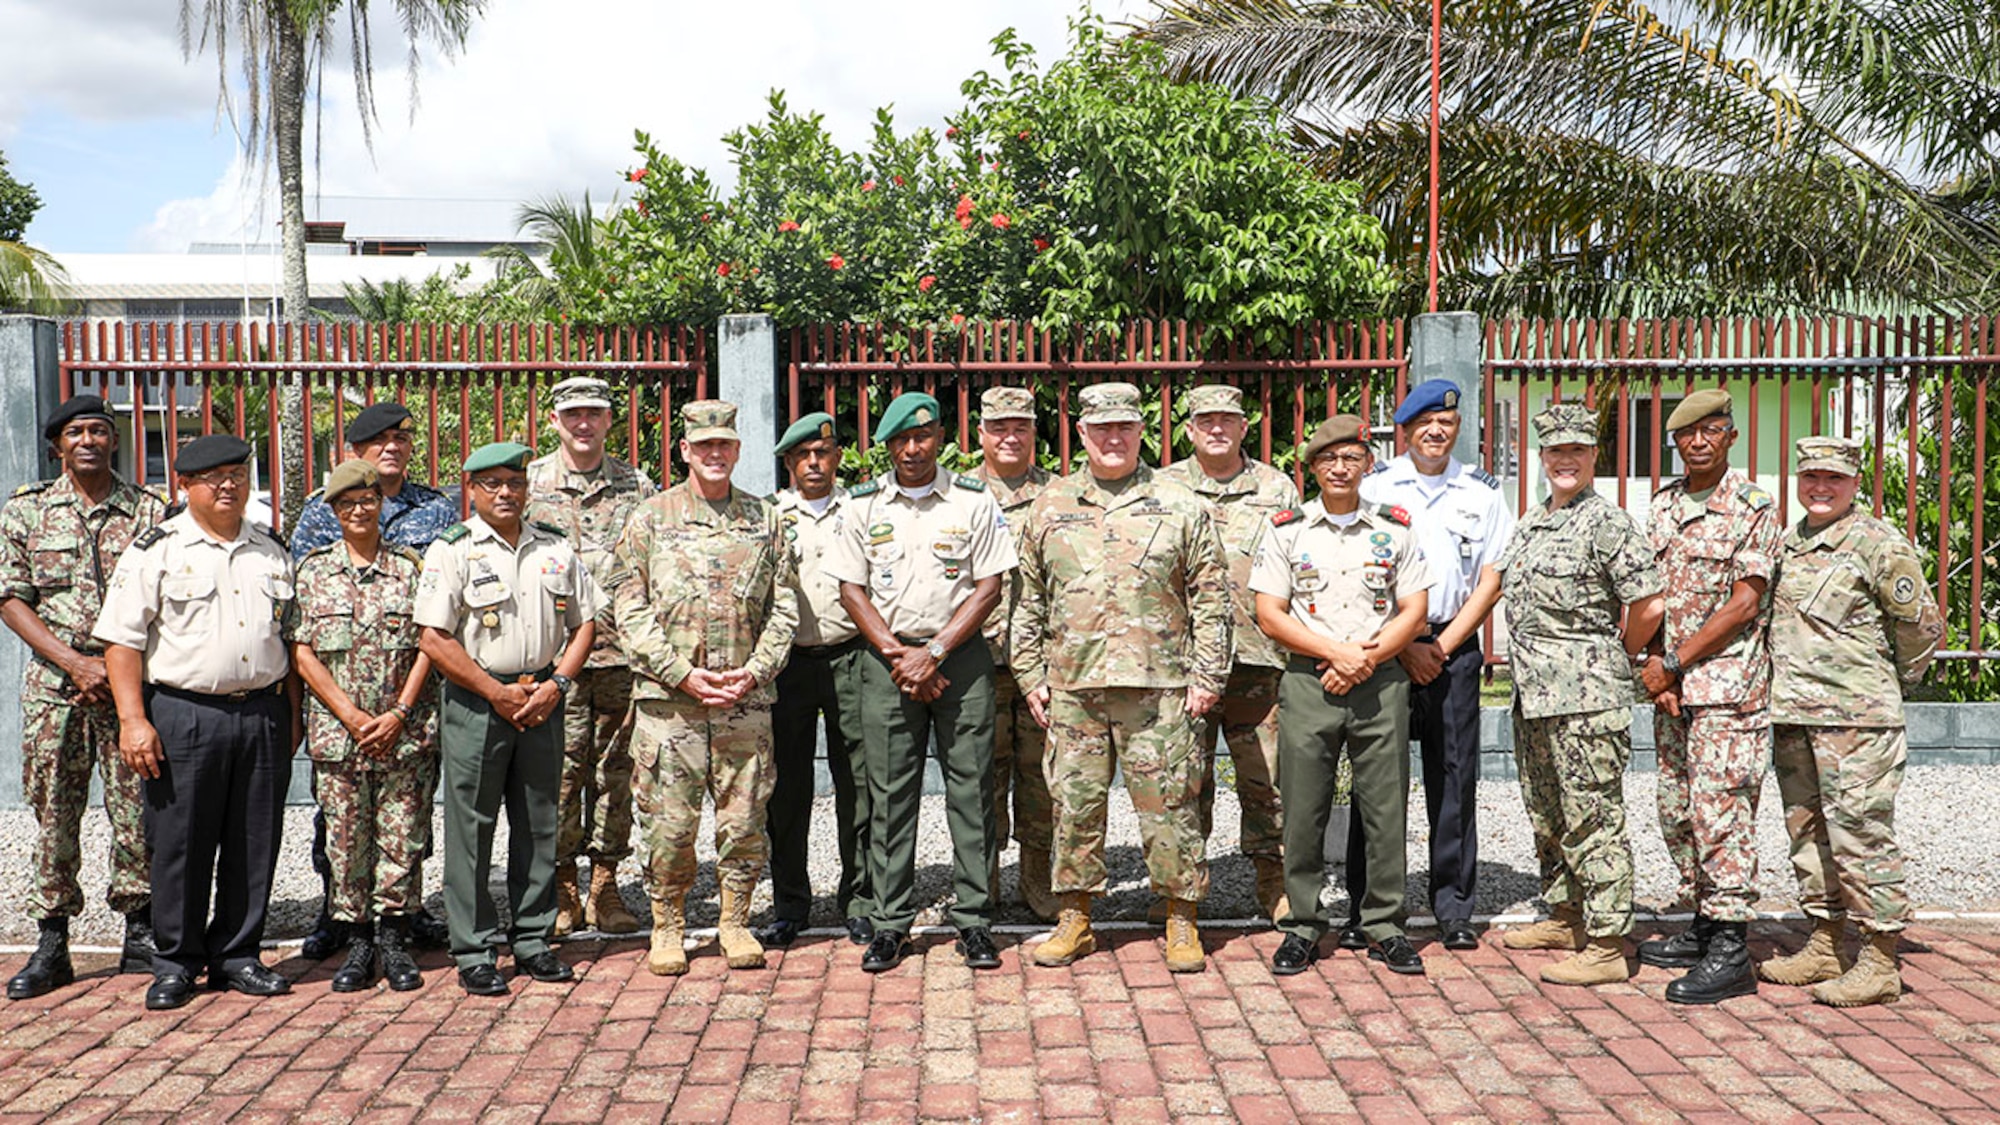 South Dakota National Guard and Suriname Defense
Force leaders stand together during a distinguished leaders visit to Paramaribo, Suriname, Nov. 24, 2021.